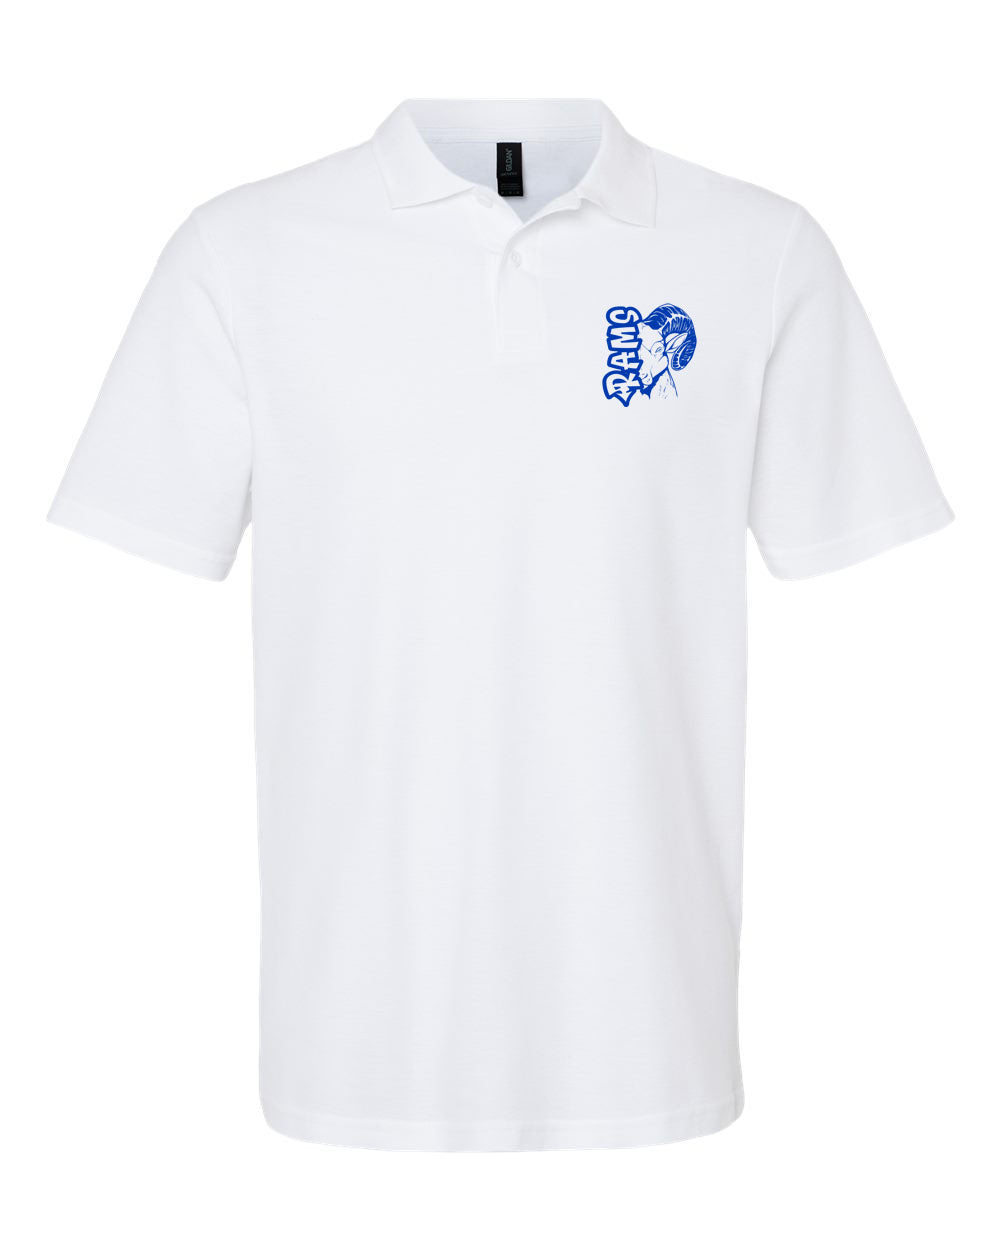 Sussex Middle design 7 Polo T-Shirt